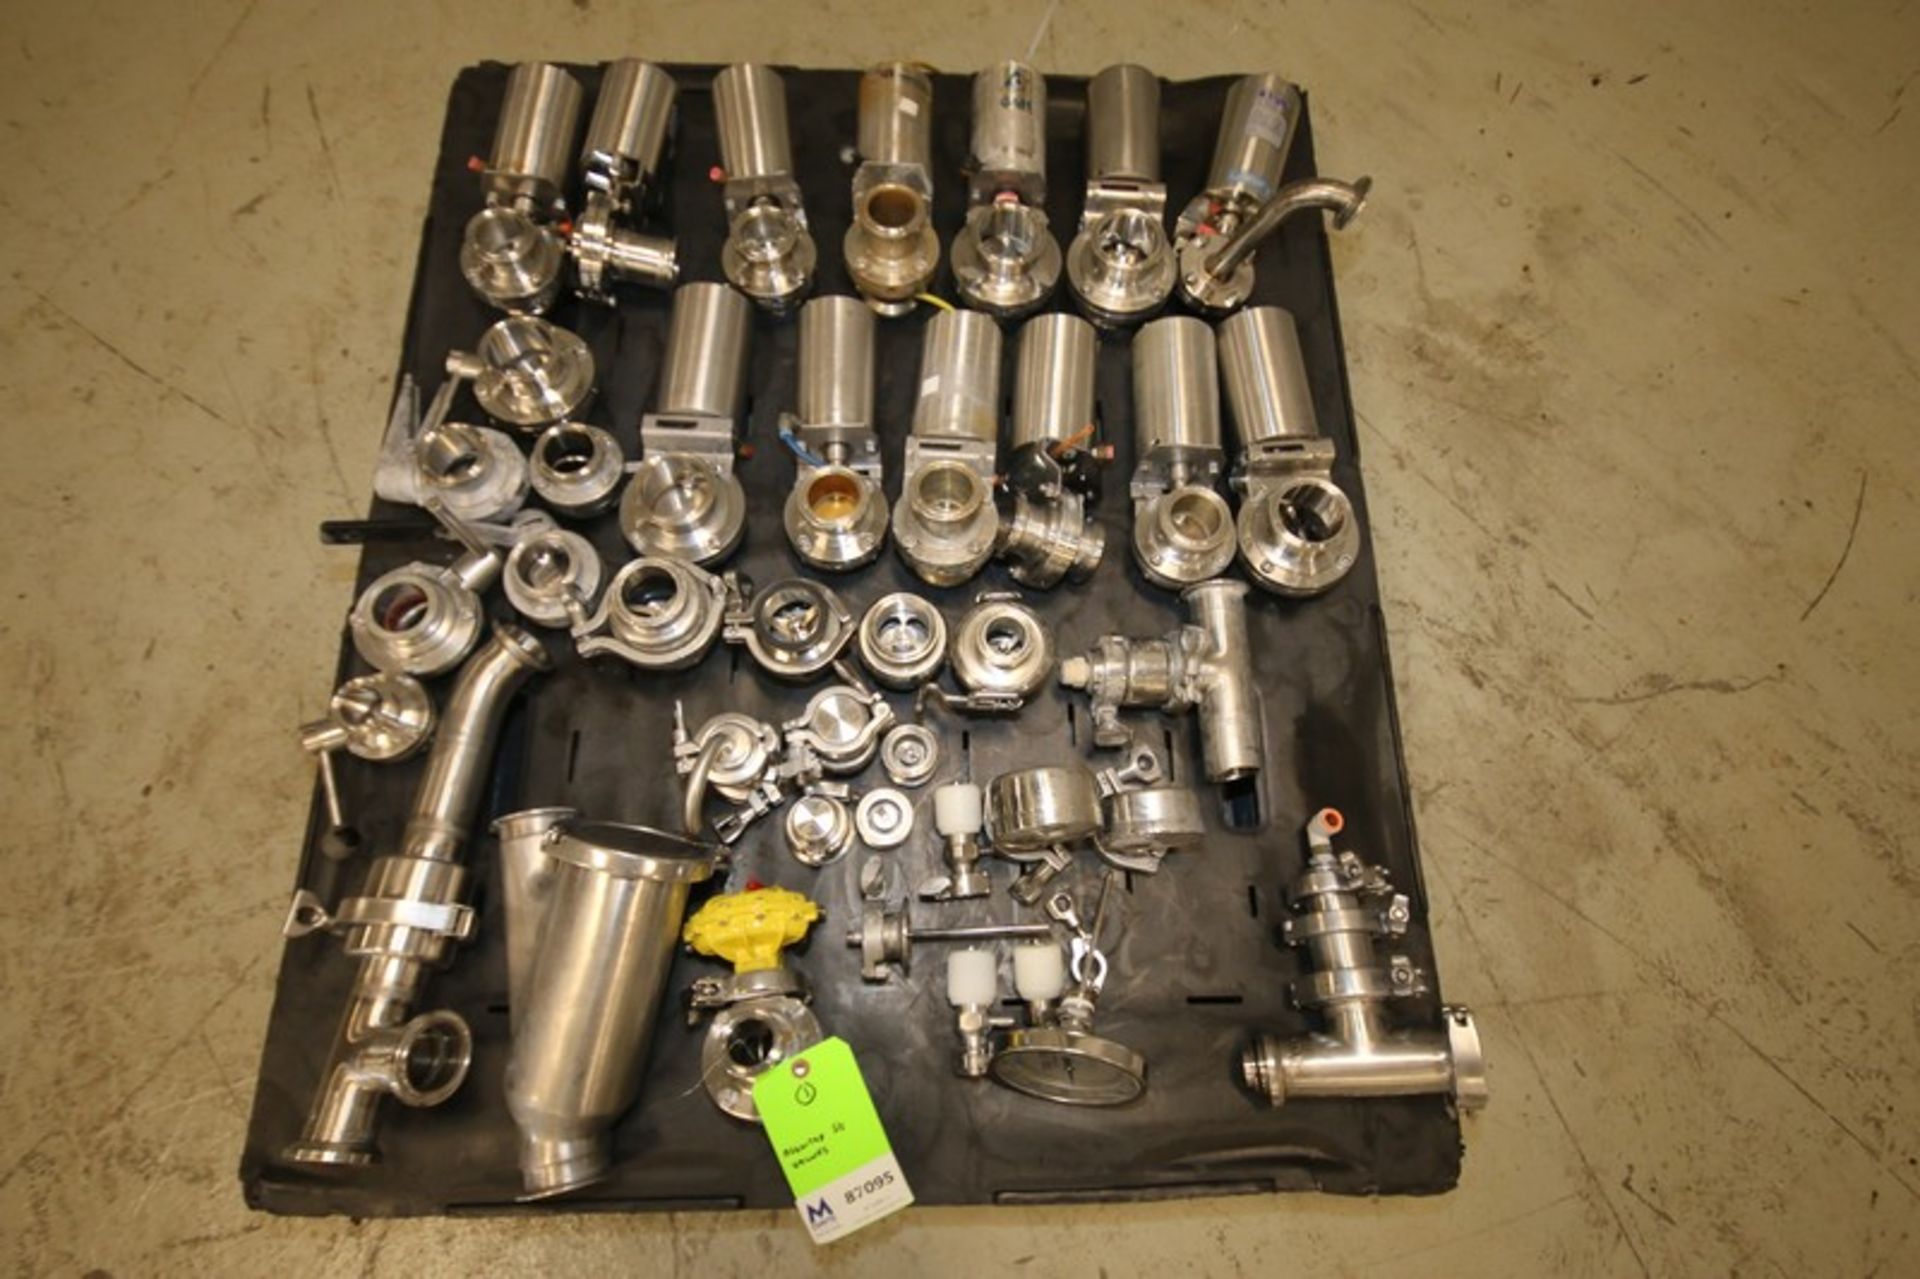 Lot of Assorted 1" to 2.5" S/S Valves & Fitting Including Check Valves, butterfly Valves, Metering - Bild 2 aus 2